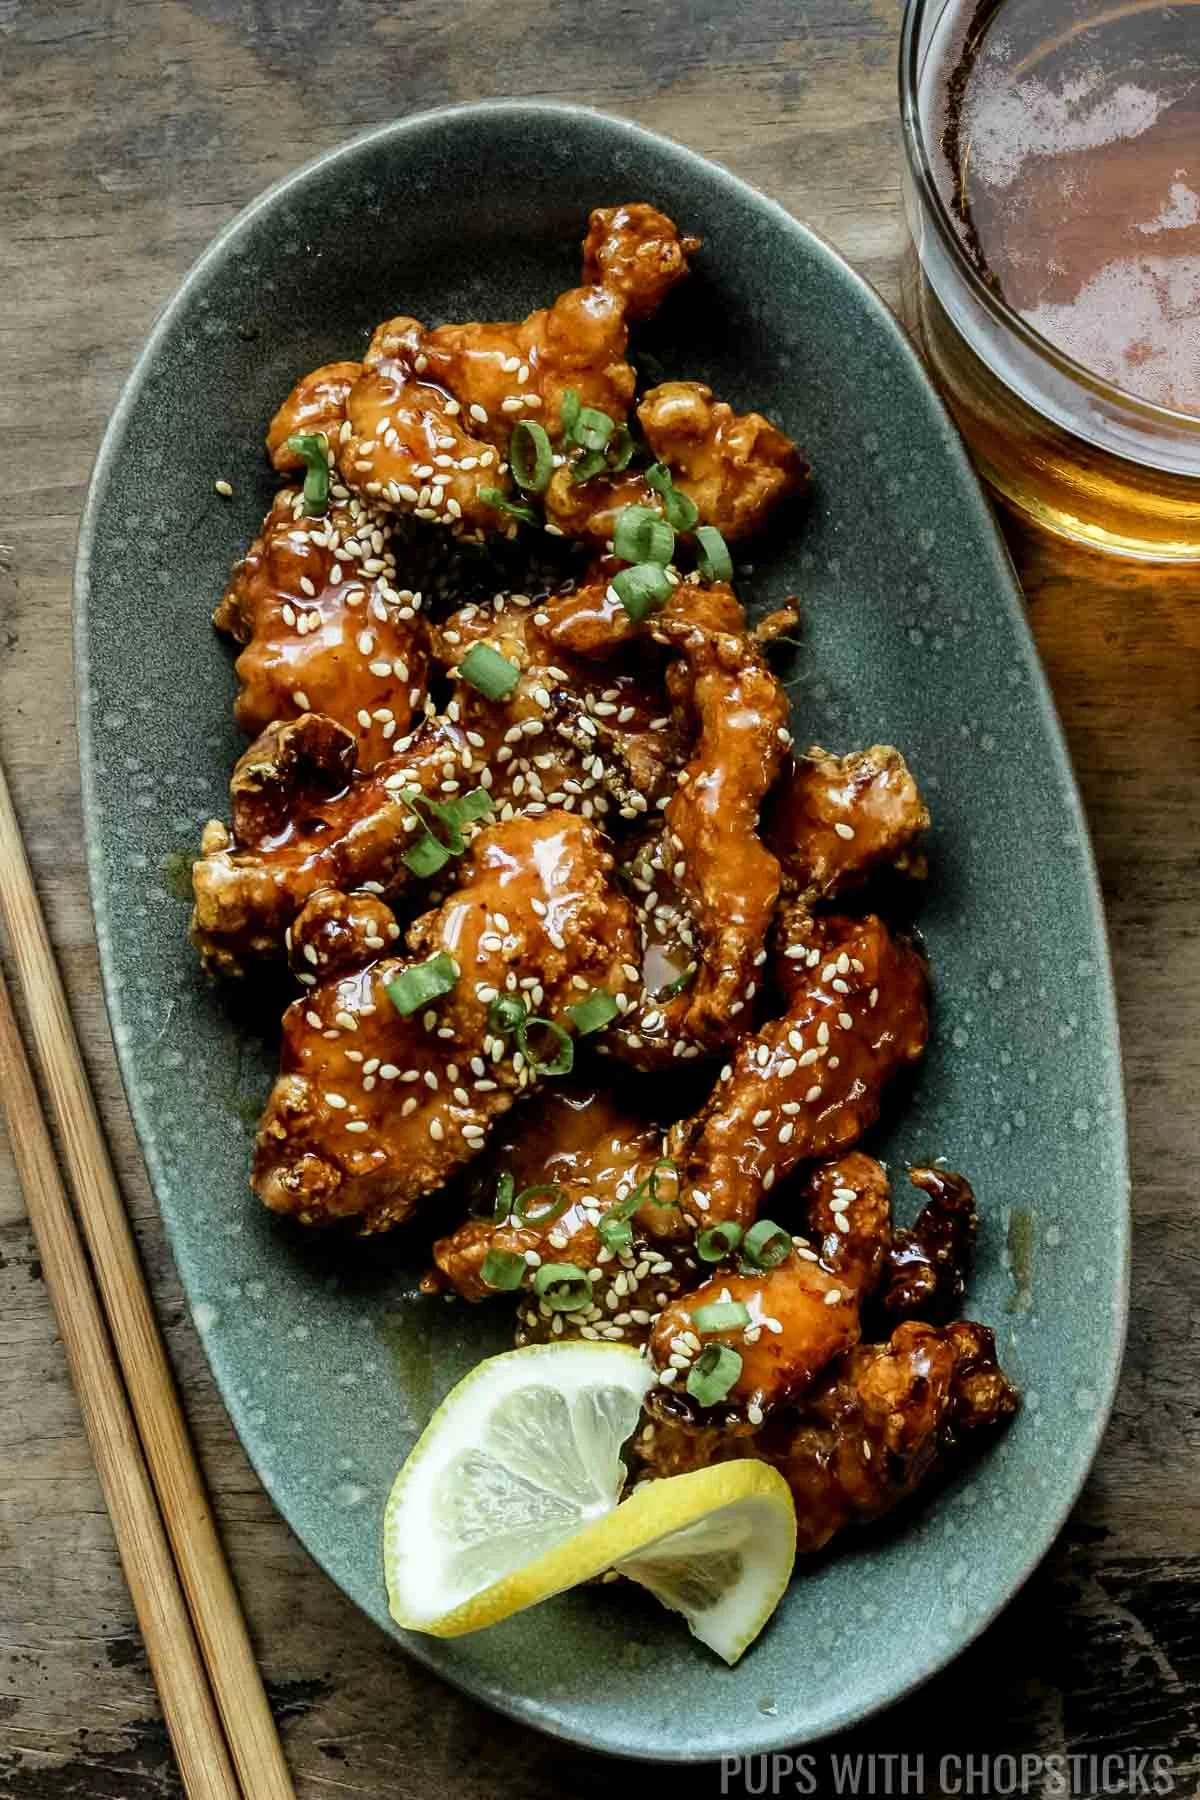 Bite-sized crispy Chinese lemon chicken tossed in a lemon sauce and served on a green plate with a lemon slice with a glass of beer and wooden chopsticks.